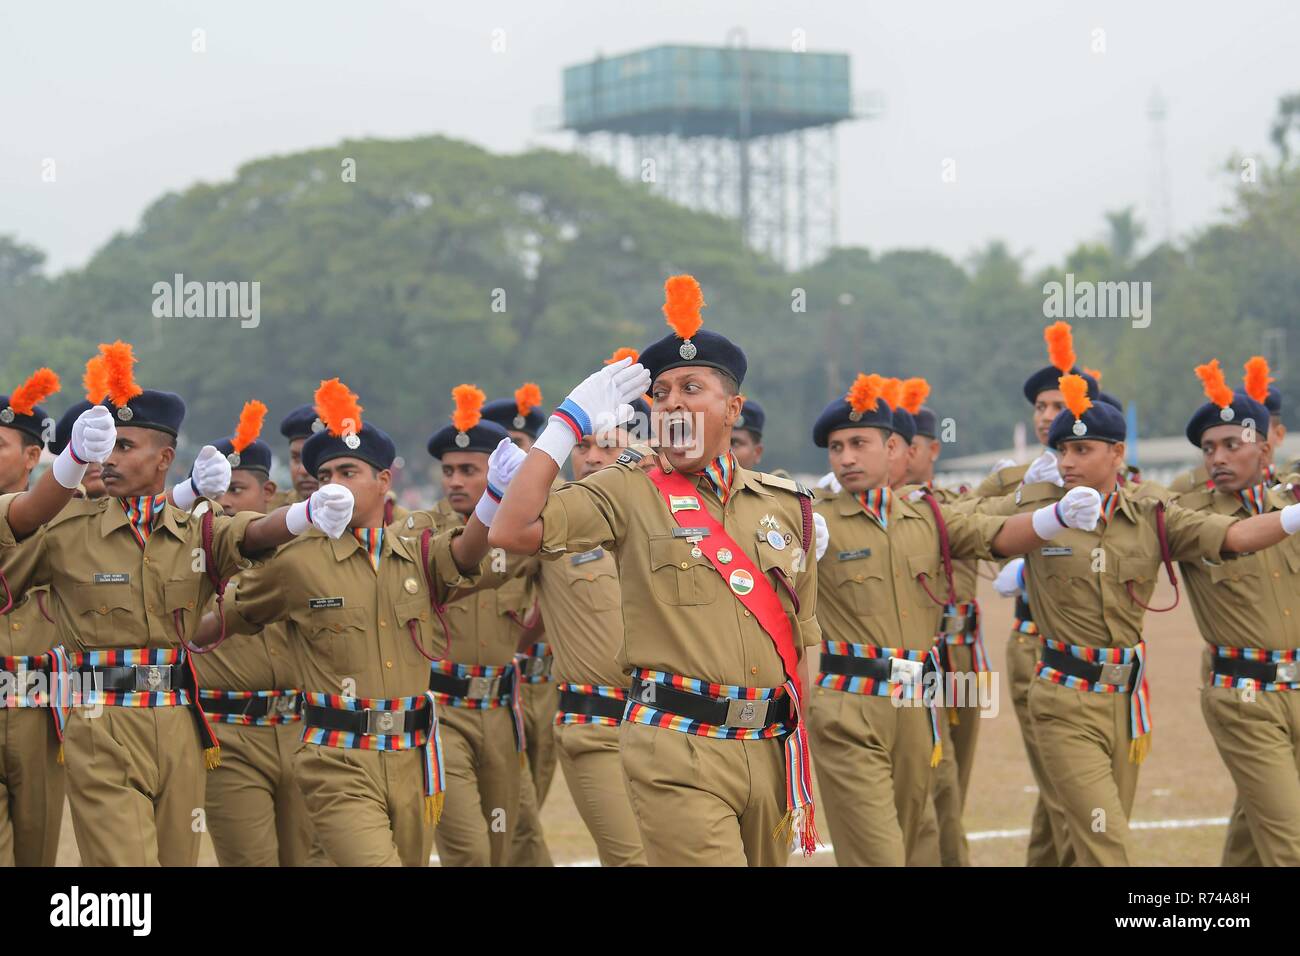 Home Guard and civil defense personnel seen parading on the occasion of 56th all India Home Guard and Civil Defense Raising day, at the police ground in Agartala, capital of the Northeastern state of Tripura, India. The Home Guard is an Indian paramilitary police force. It is a voluntary force, tasked as an auxiliary to the State police. The Home Guard was reorganized in 1962, after the war with China. Civil defense or civil protection is an effort to protect the citizens of a state from military attacks and natural disasters. It uses the principles of emergency operations: prevention, mitigat Stock Photo